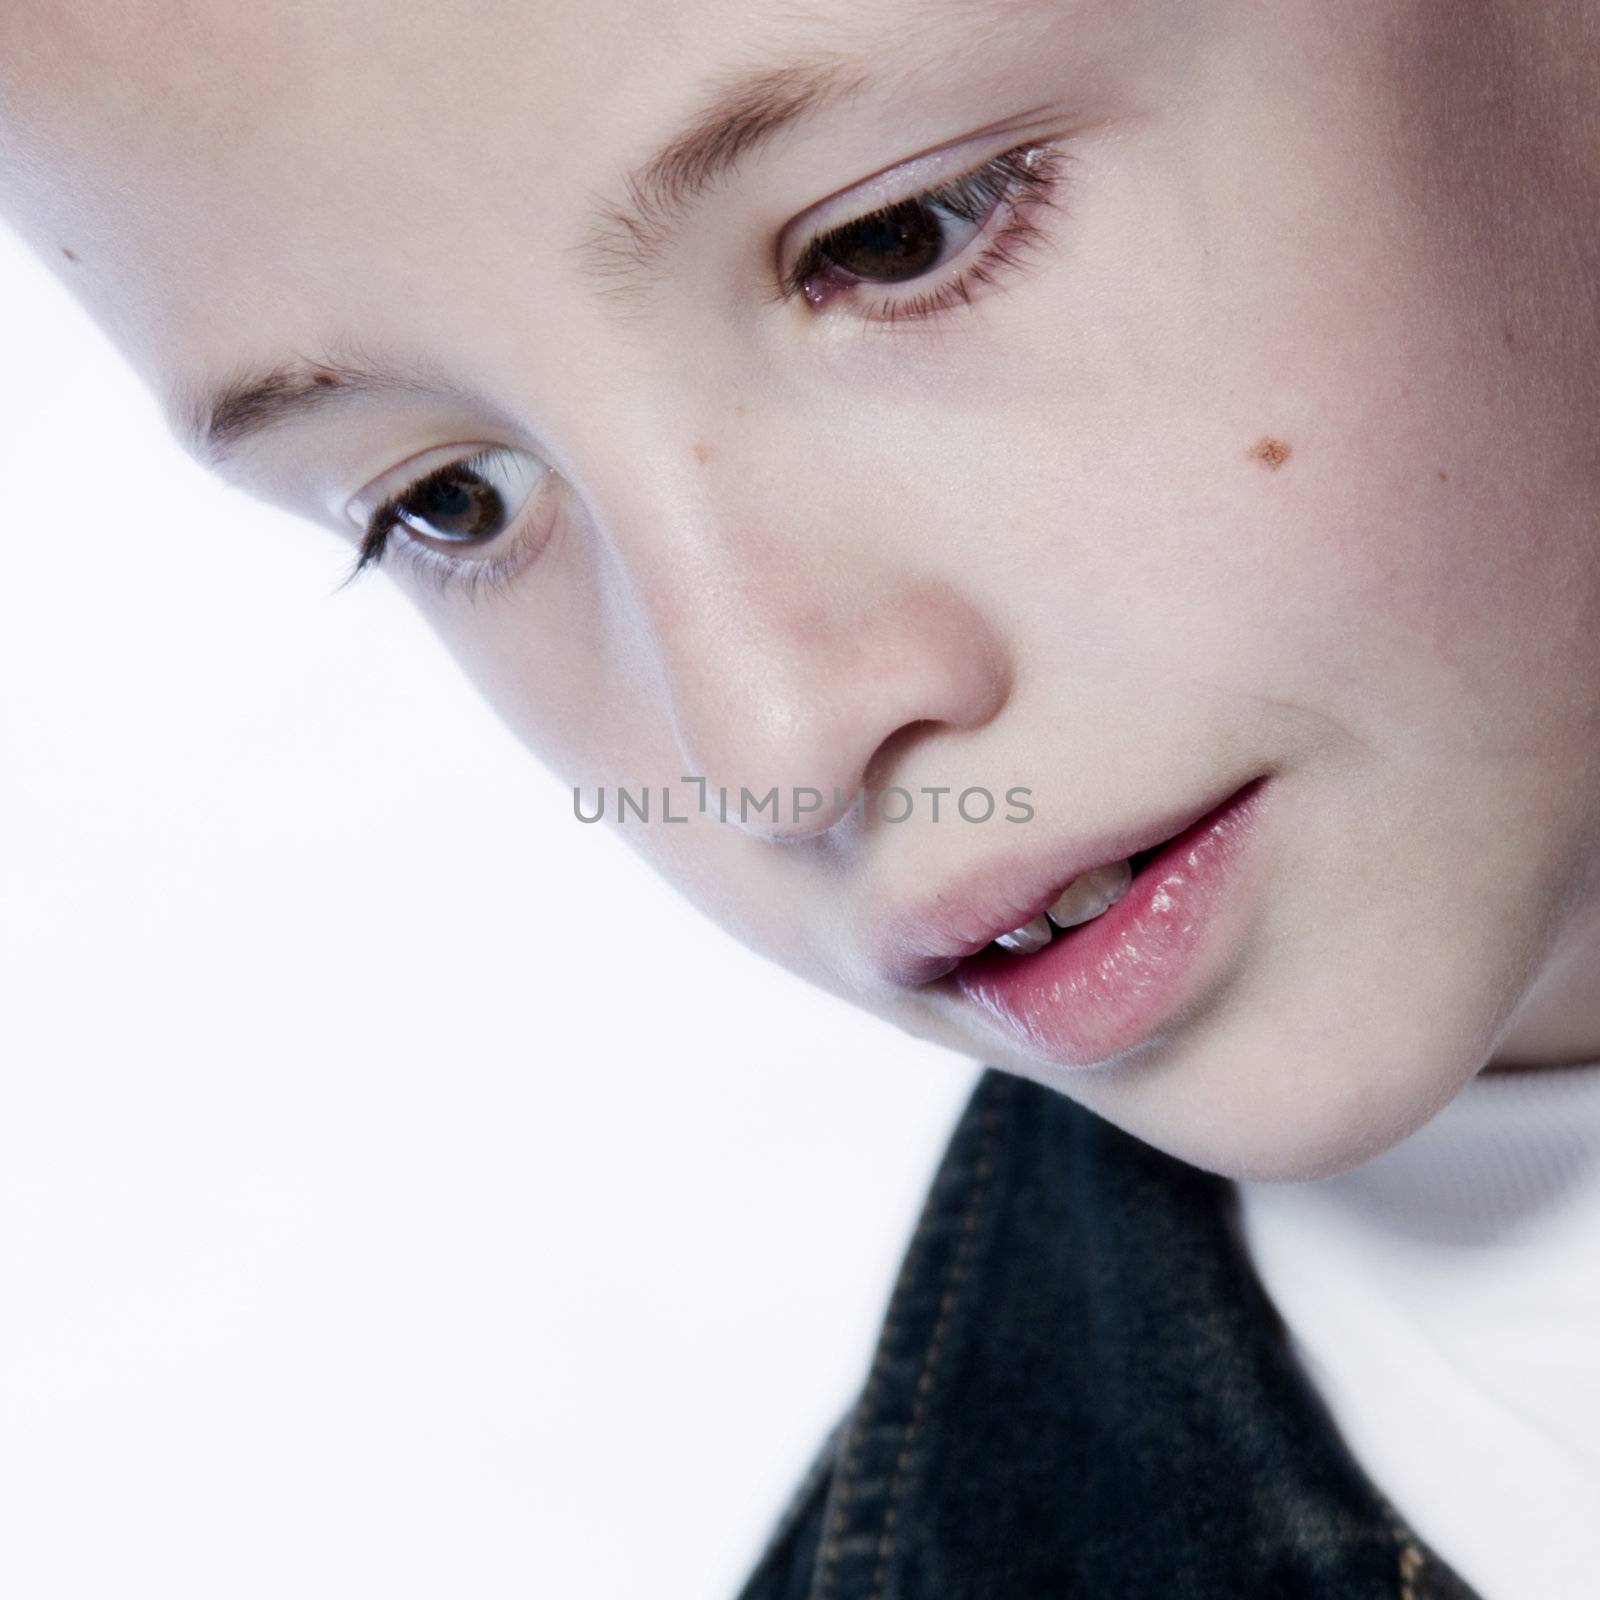 Young boy in thinking pose by DNFStyle